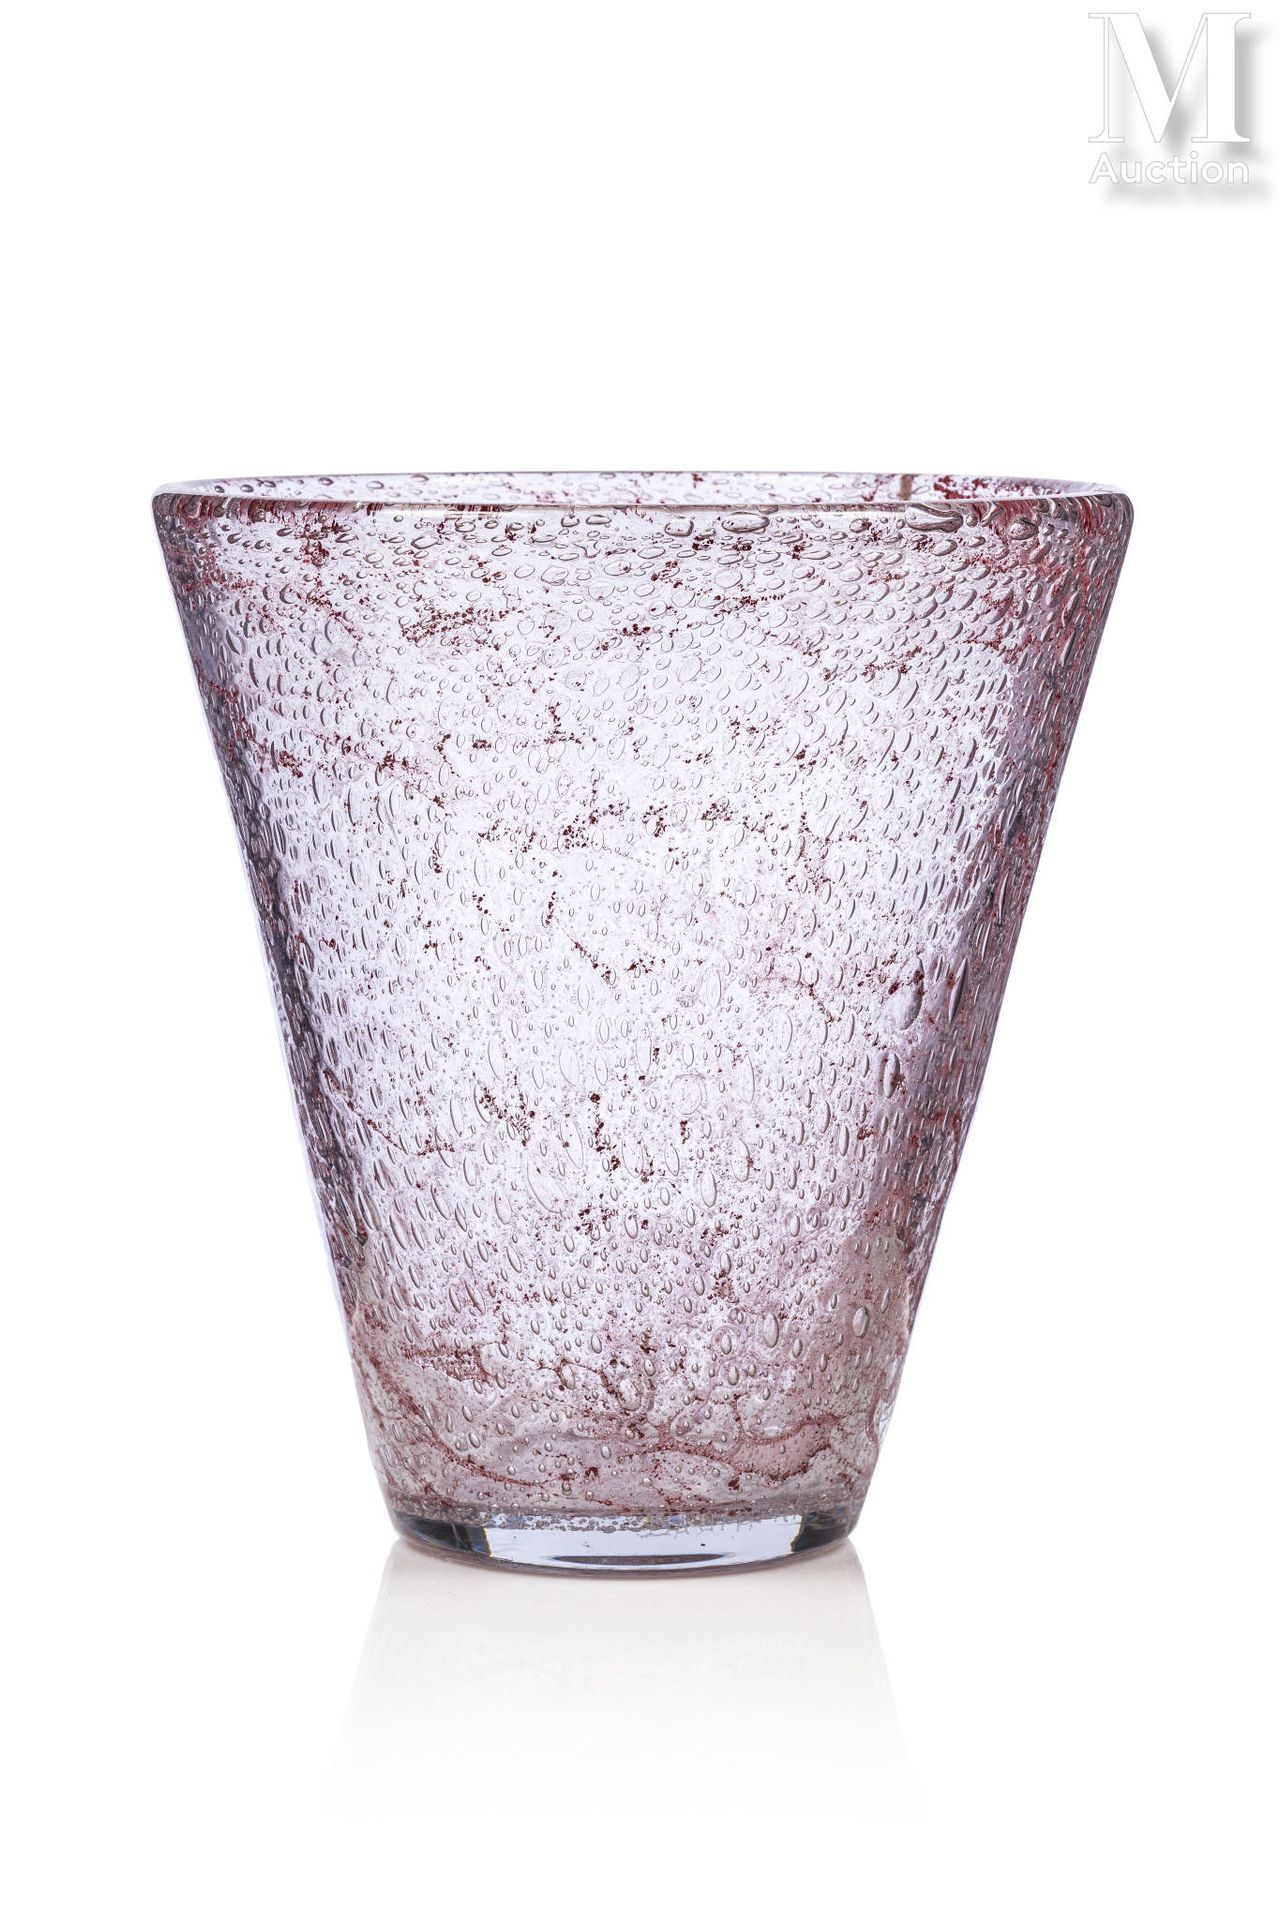 DAUM - Nancy FRANCE Vase in thick bubbled glass decorated with pinkish-red powde&hellip;